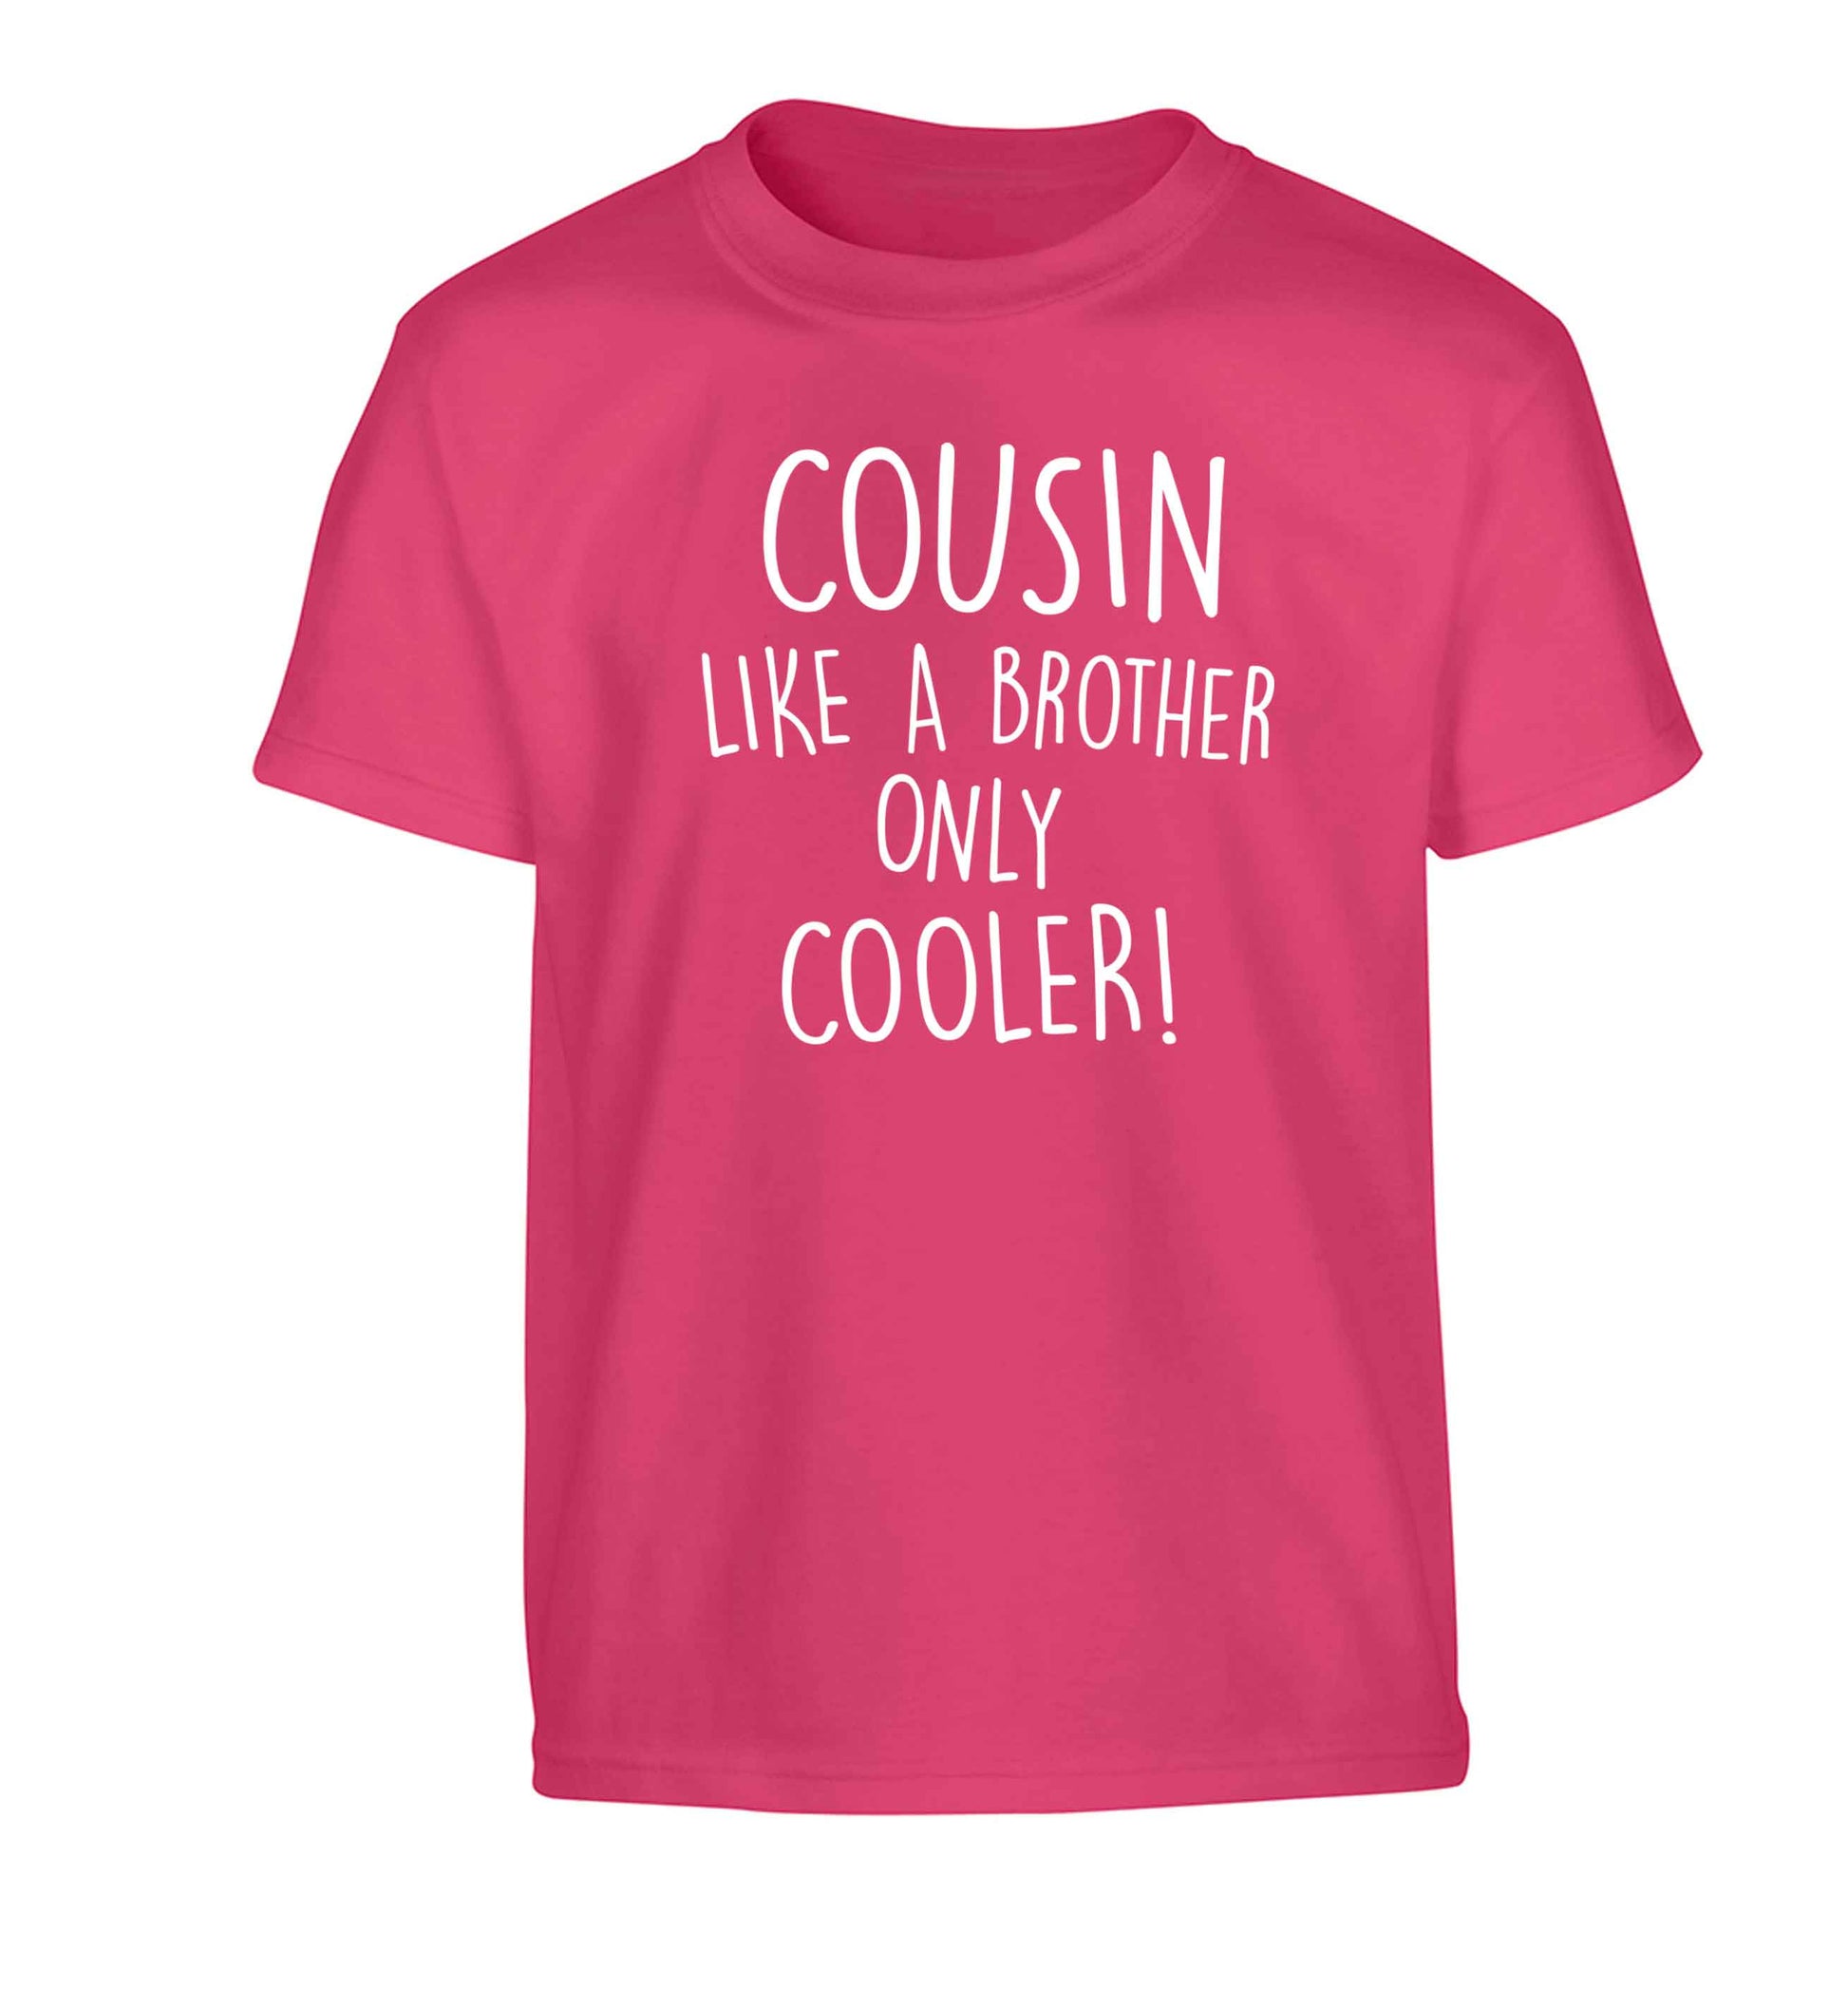 Cousin like a brother only cooler Children's pink Tshirt 12-13 Years